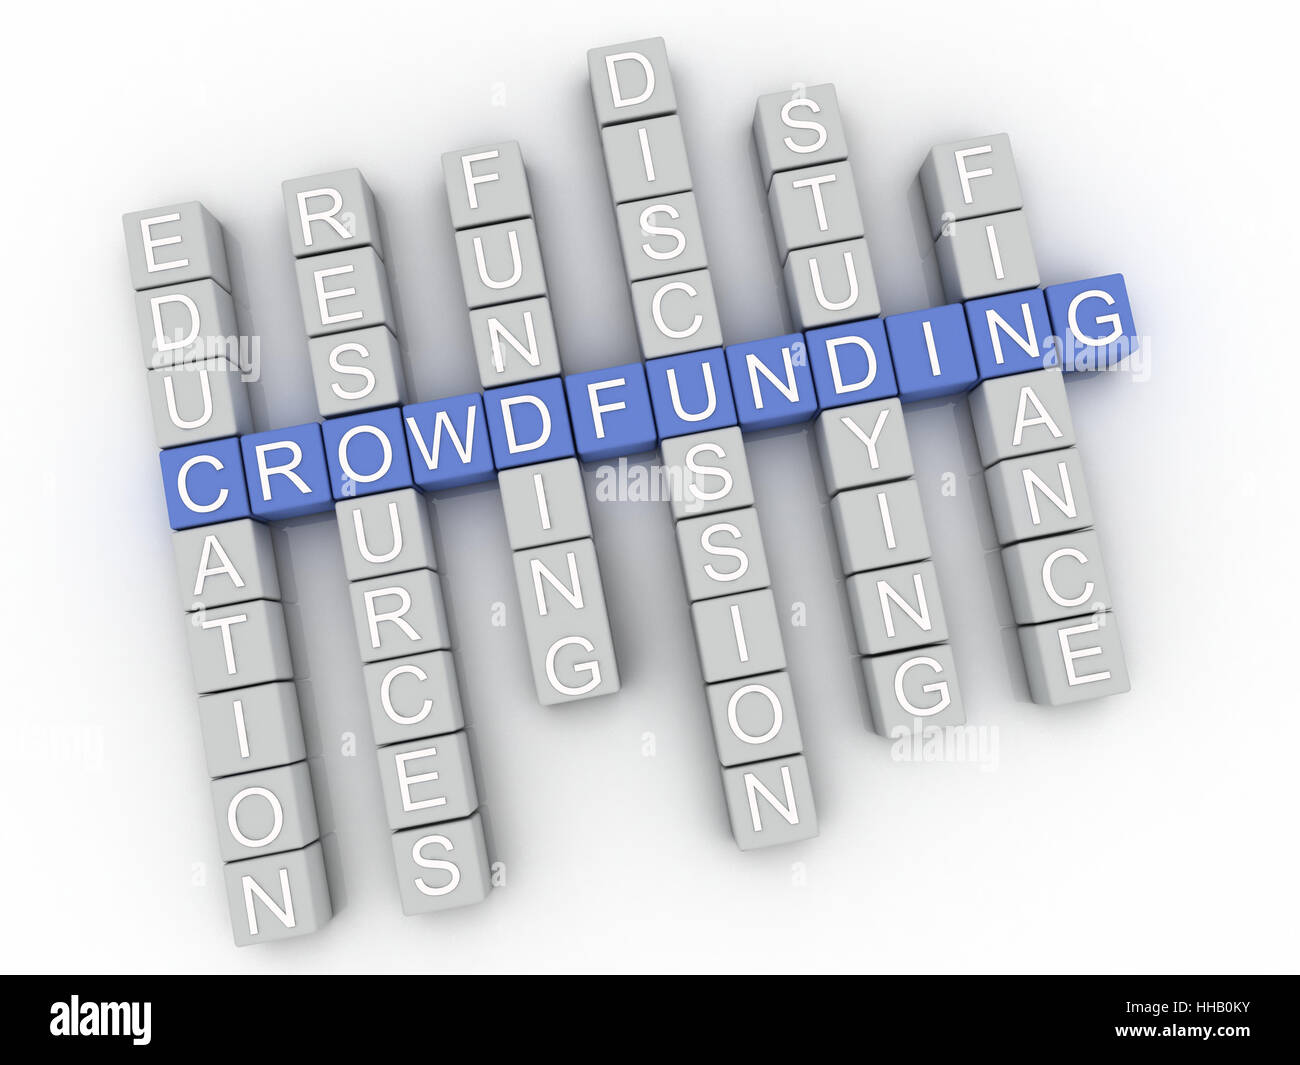 3d image Crowdfunding issues concept word cloud background Stock Photo